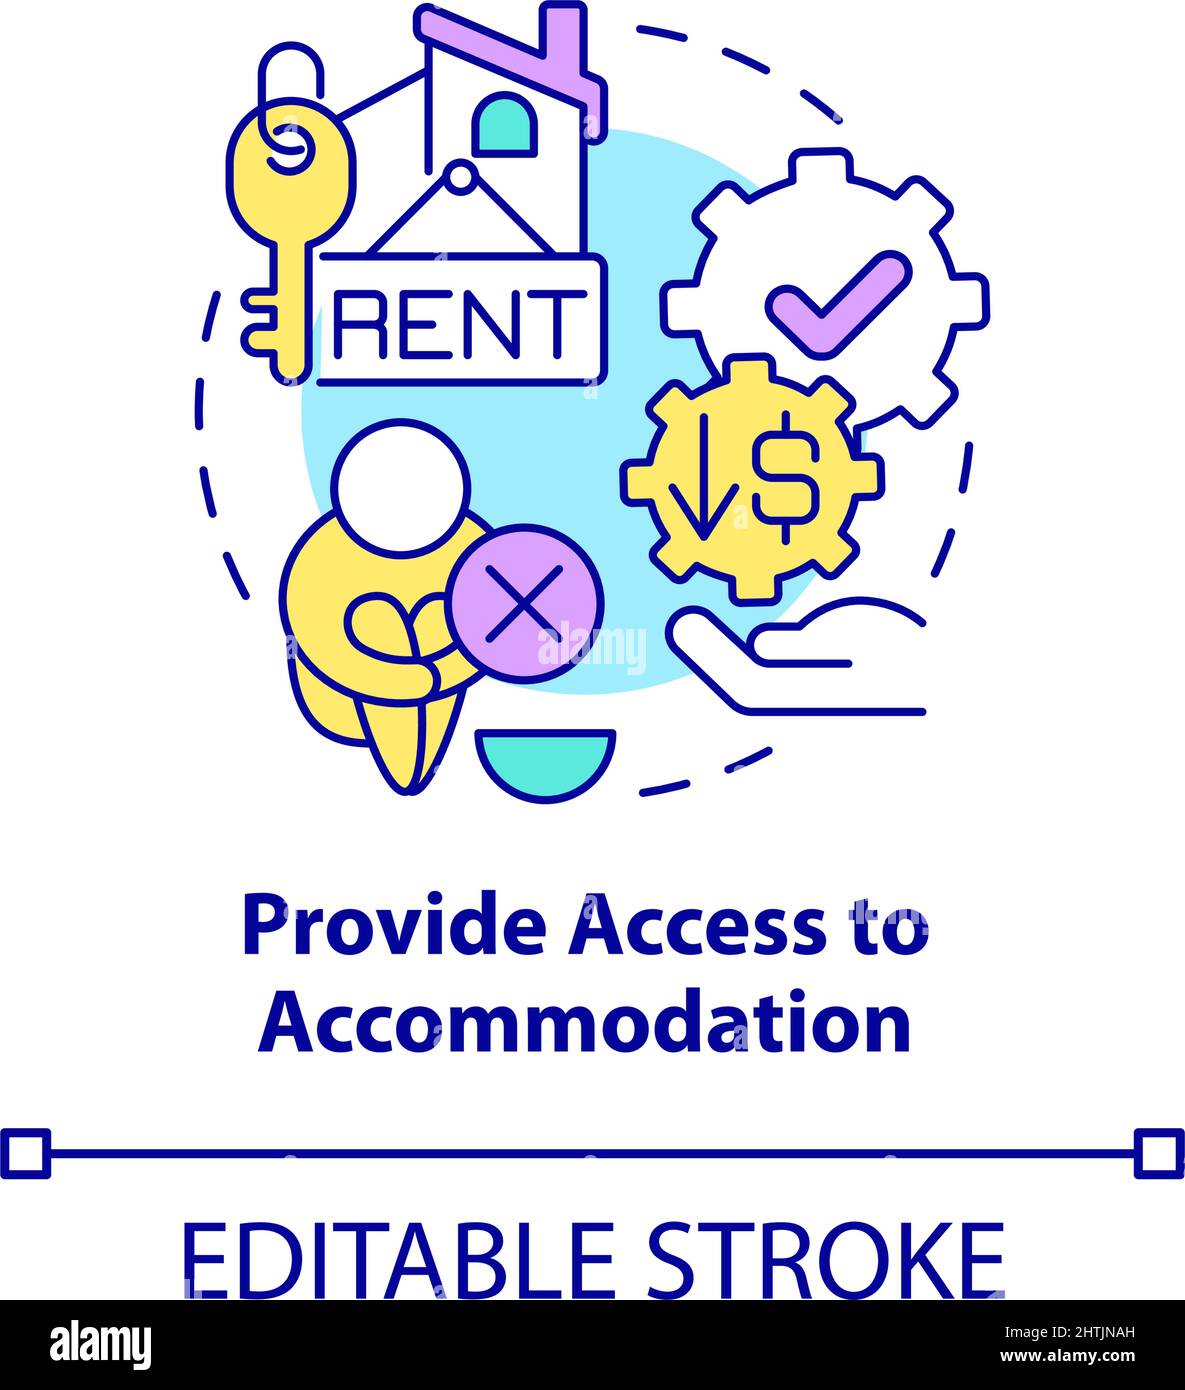 Provide access to accommodation concept icon Stock Vector